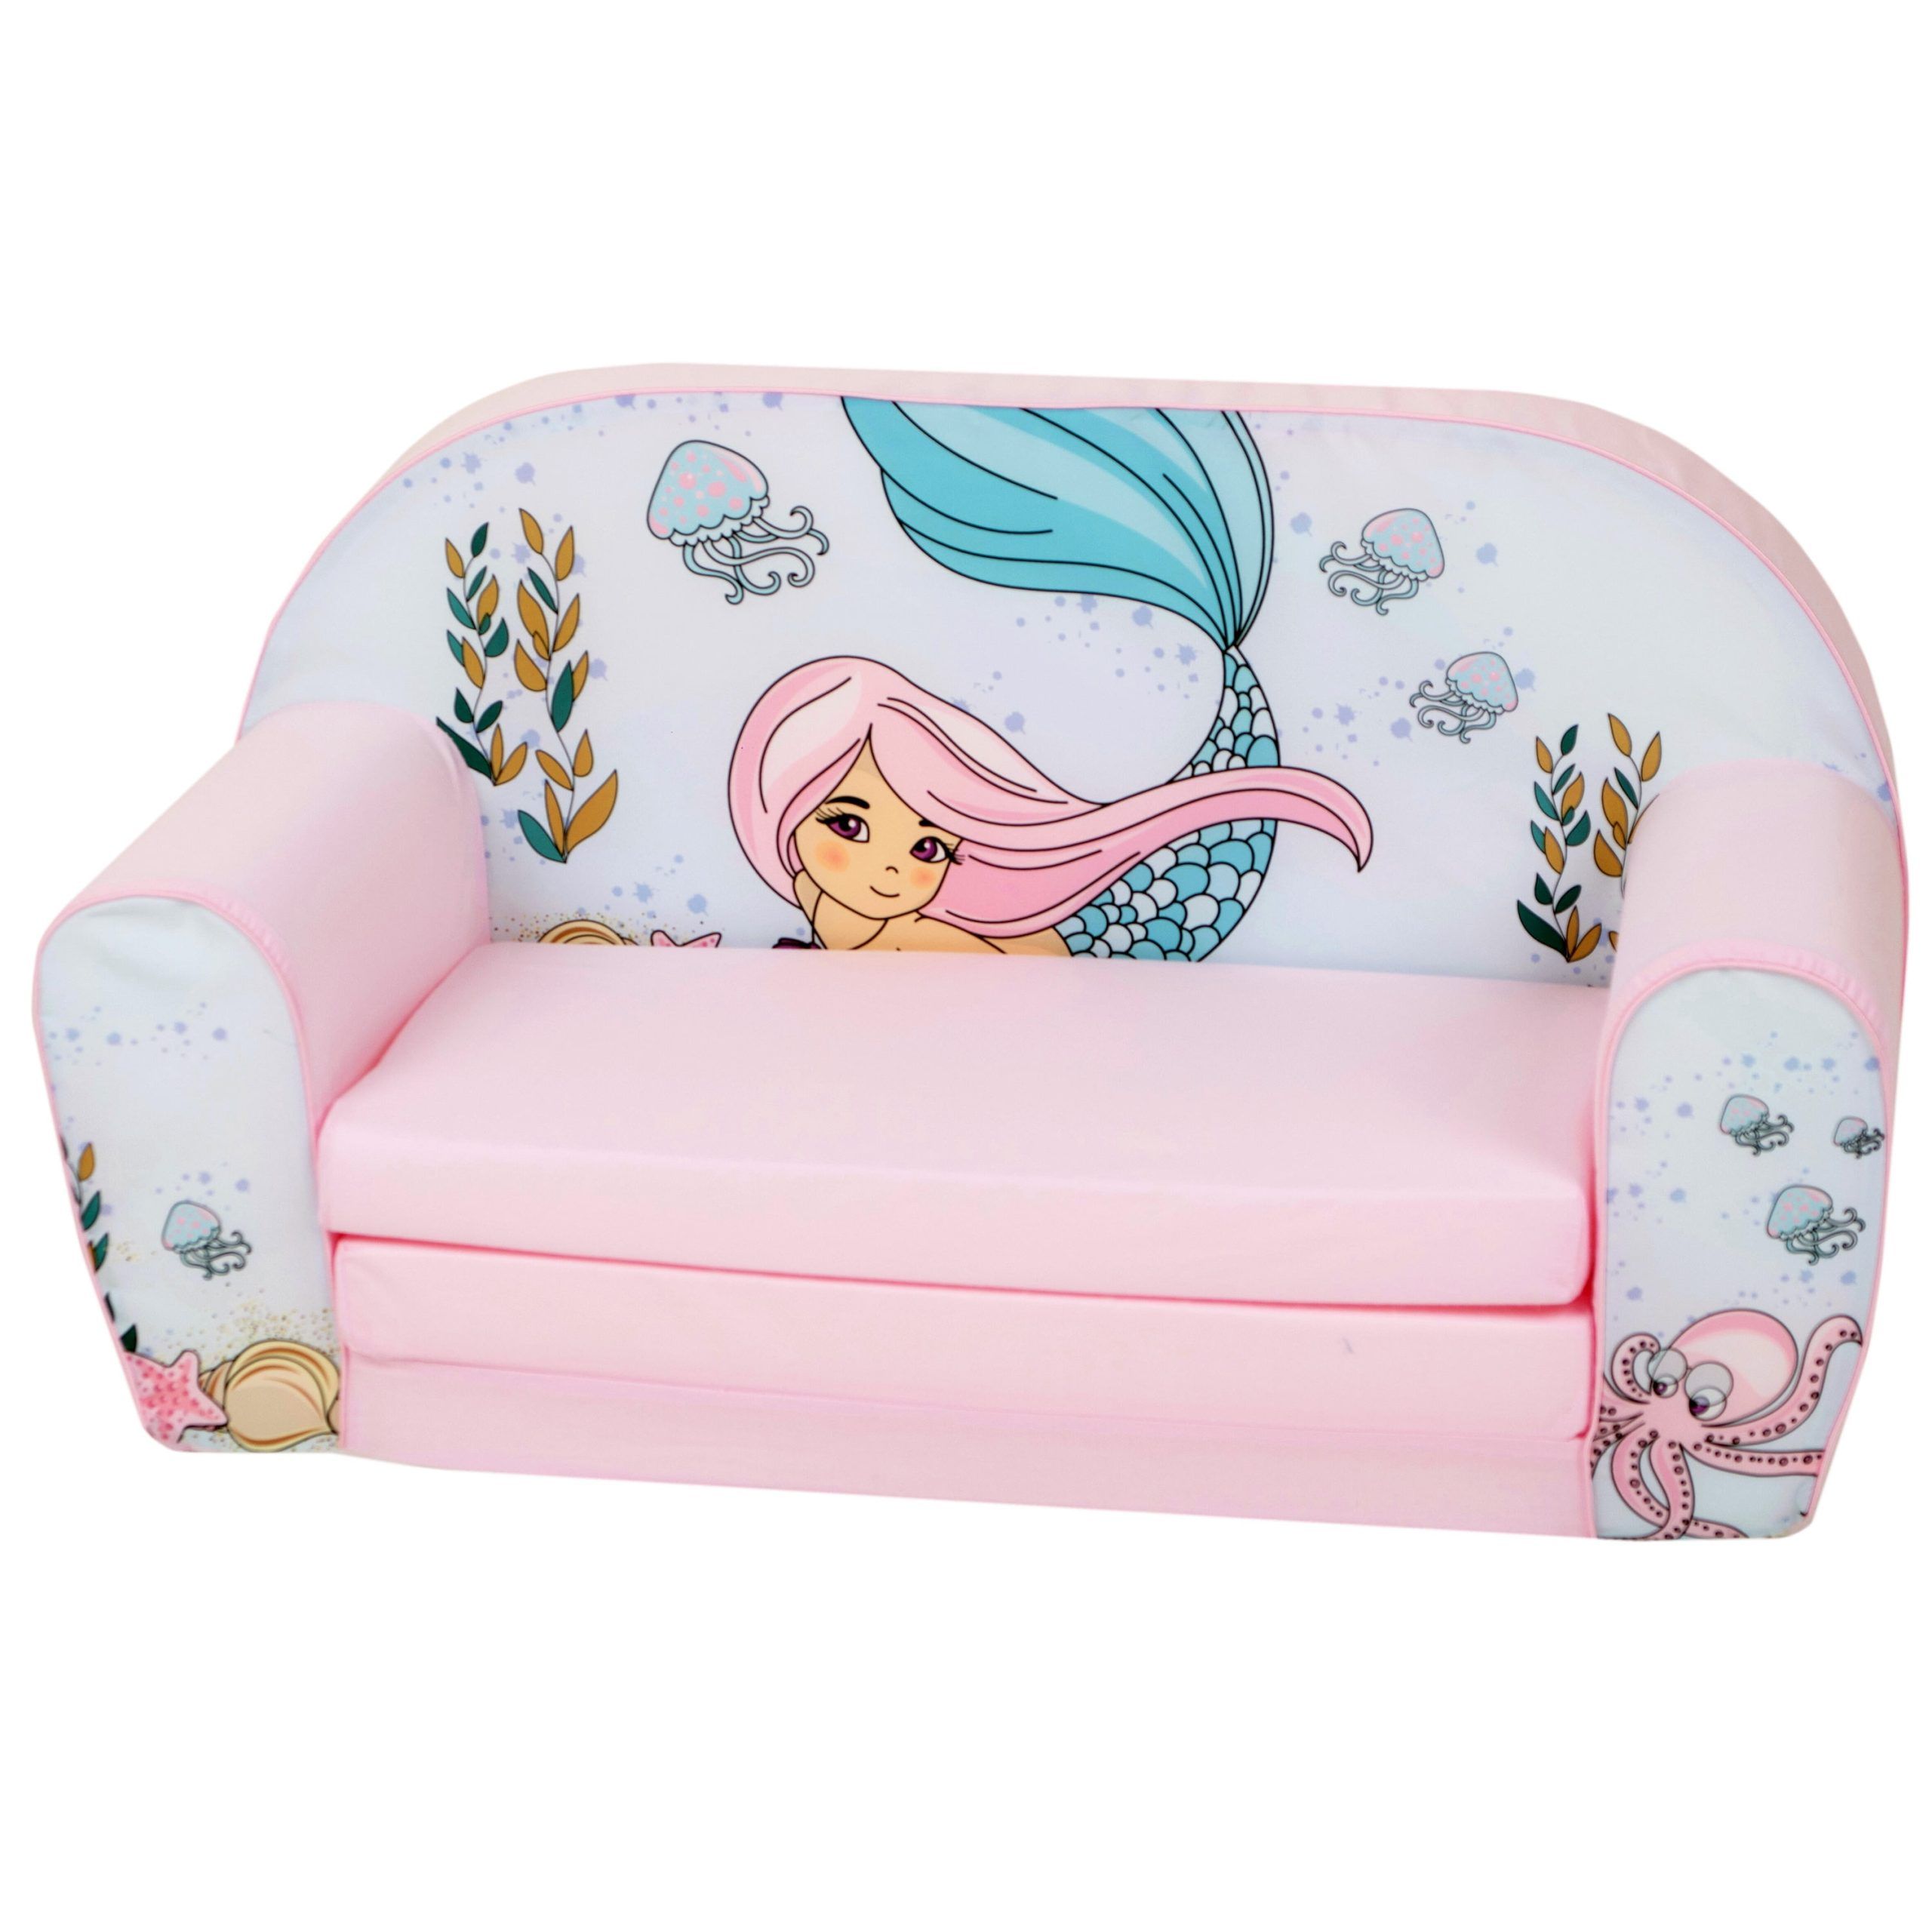 Delsit Toddler Couch & Kids Sofa – European Made Children's 2 In 1 Flip Within Children&#039;s Sofa Beds (View 12 of 20)